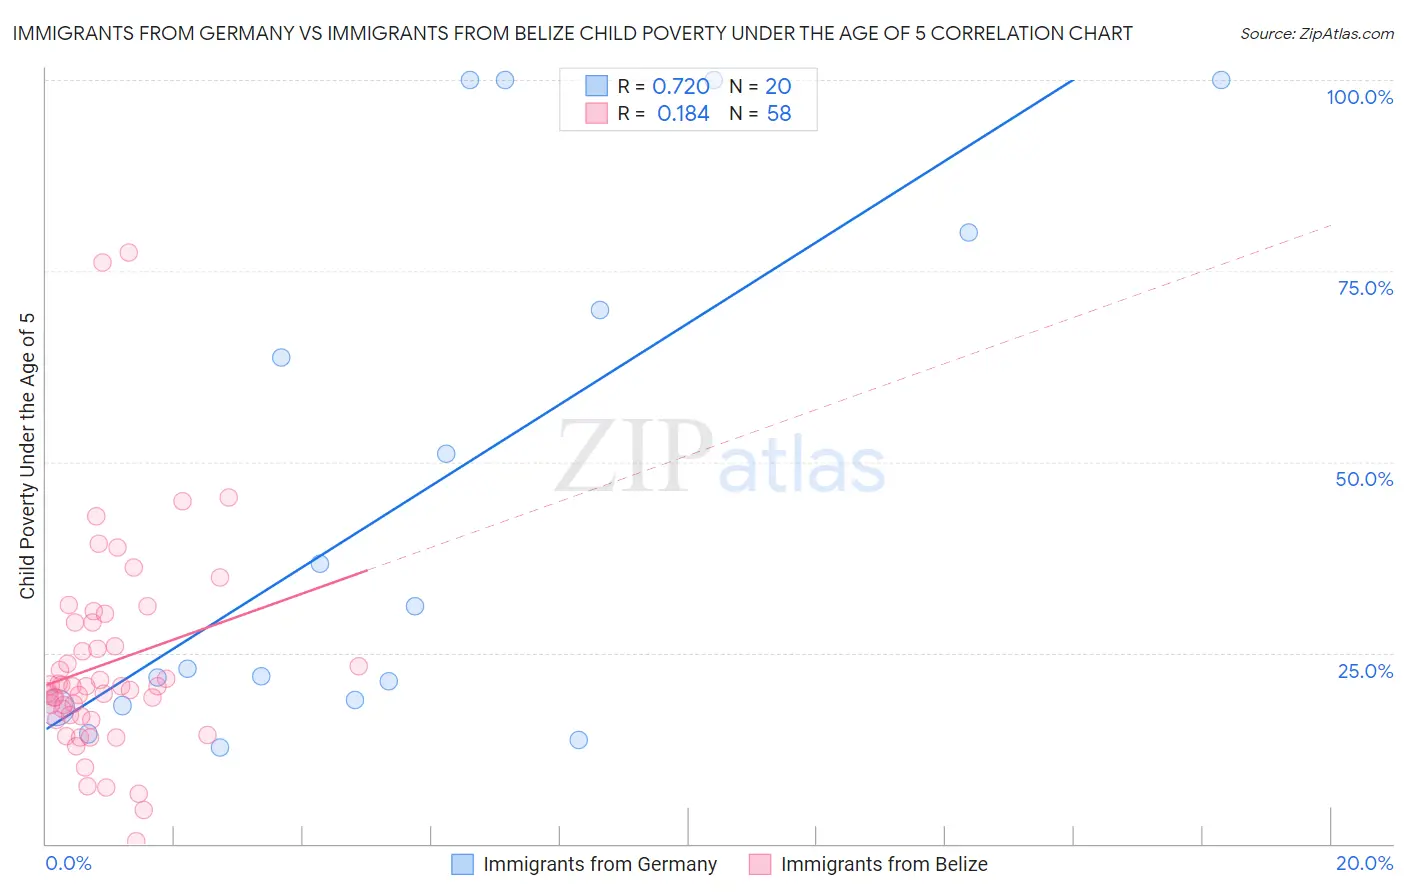 Immigrants from Germany vs Immigrants from Belize Child Poverty Under the Age of 5